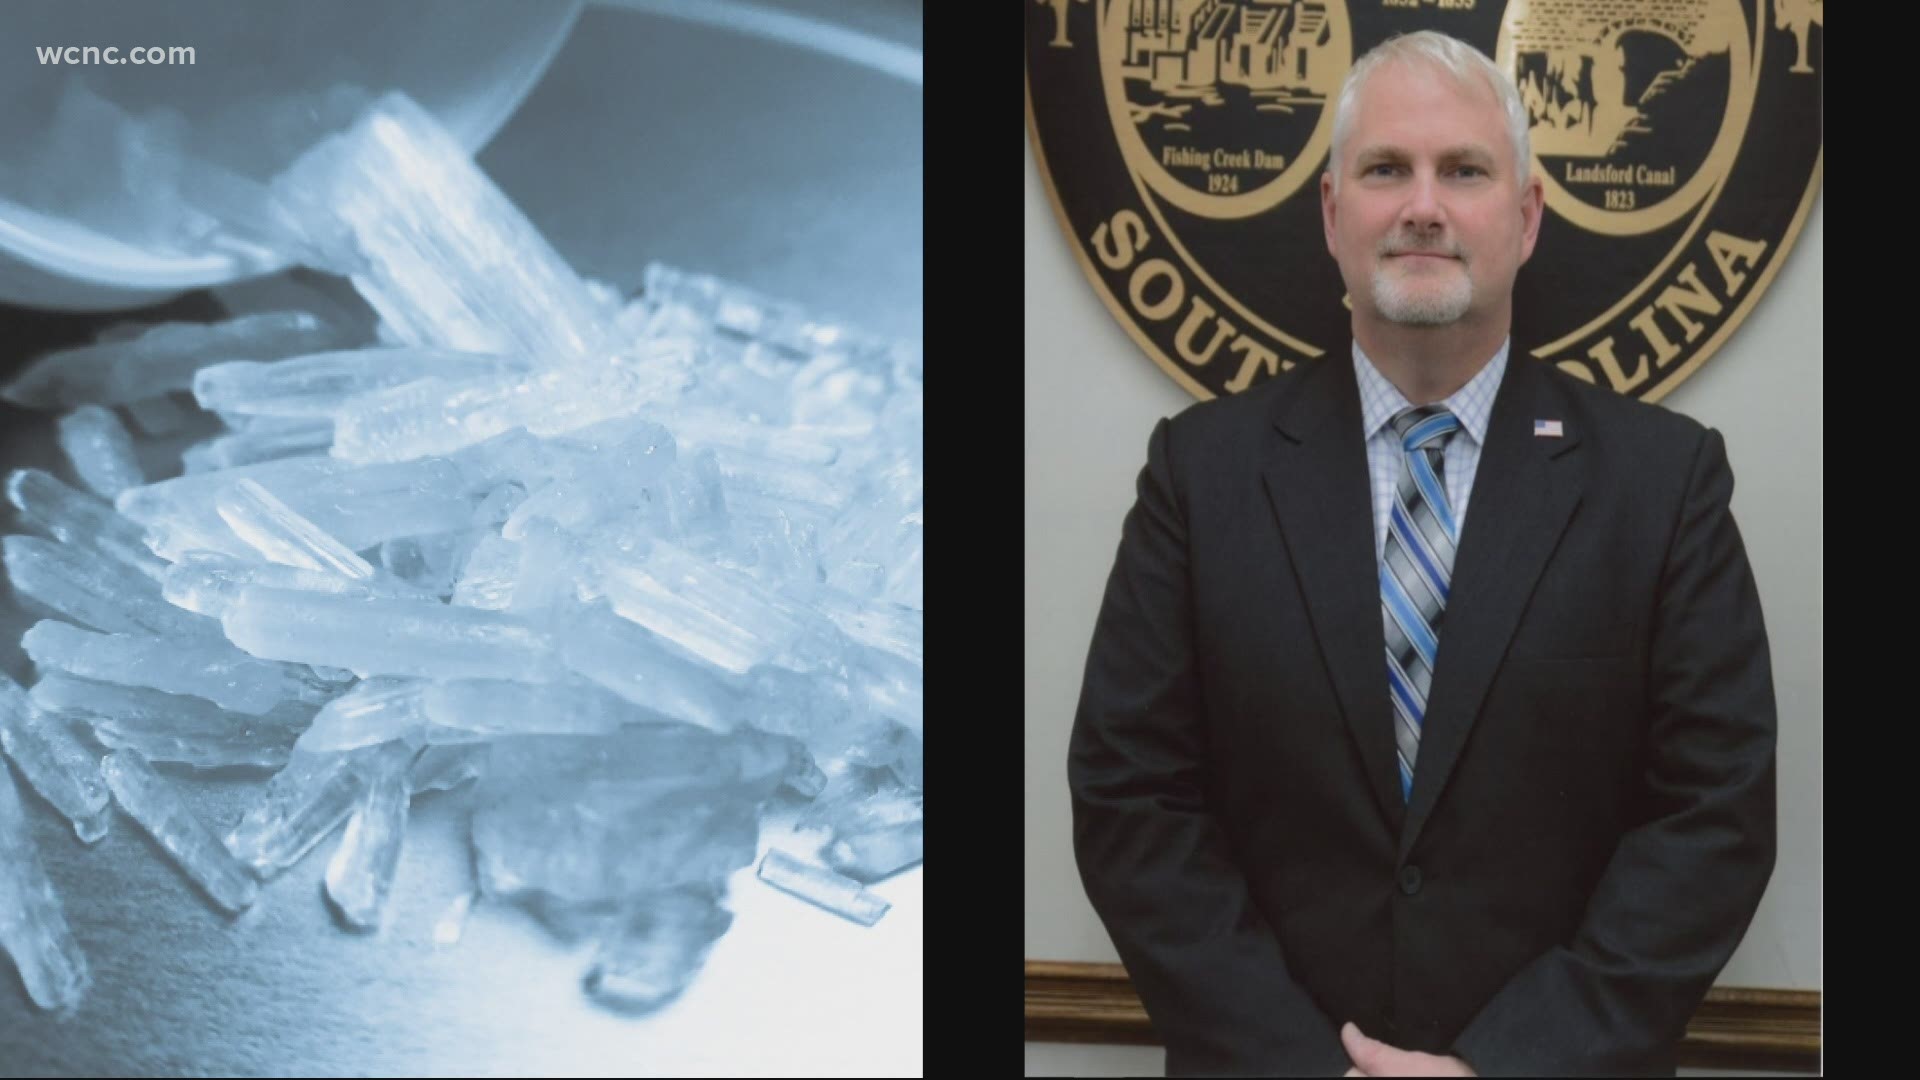 The Chester County supervisor Kenneth Stuart has been arrested and charged with distributing and trafficking meth and doing it while he was on the job.